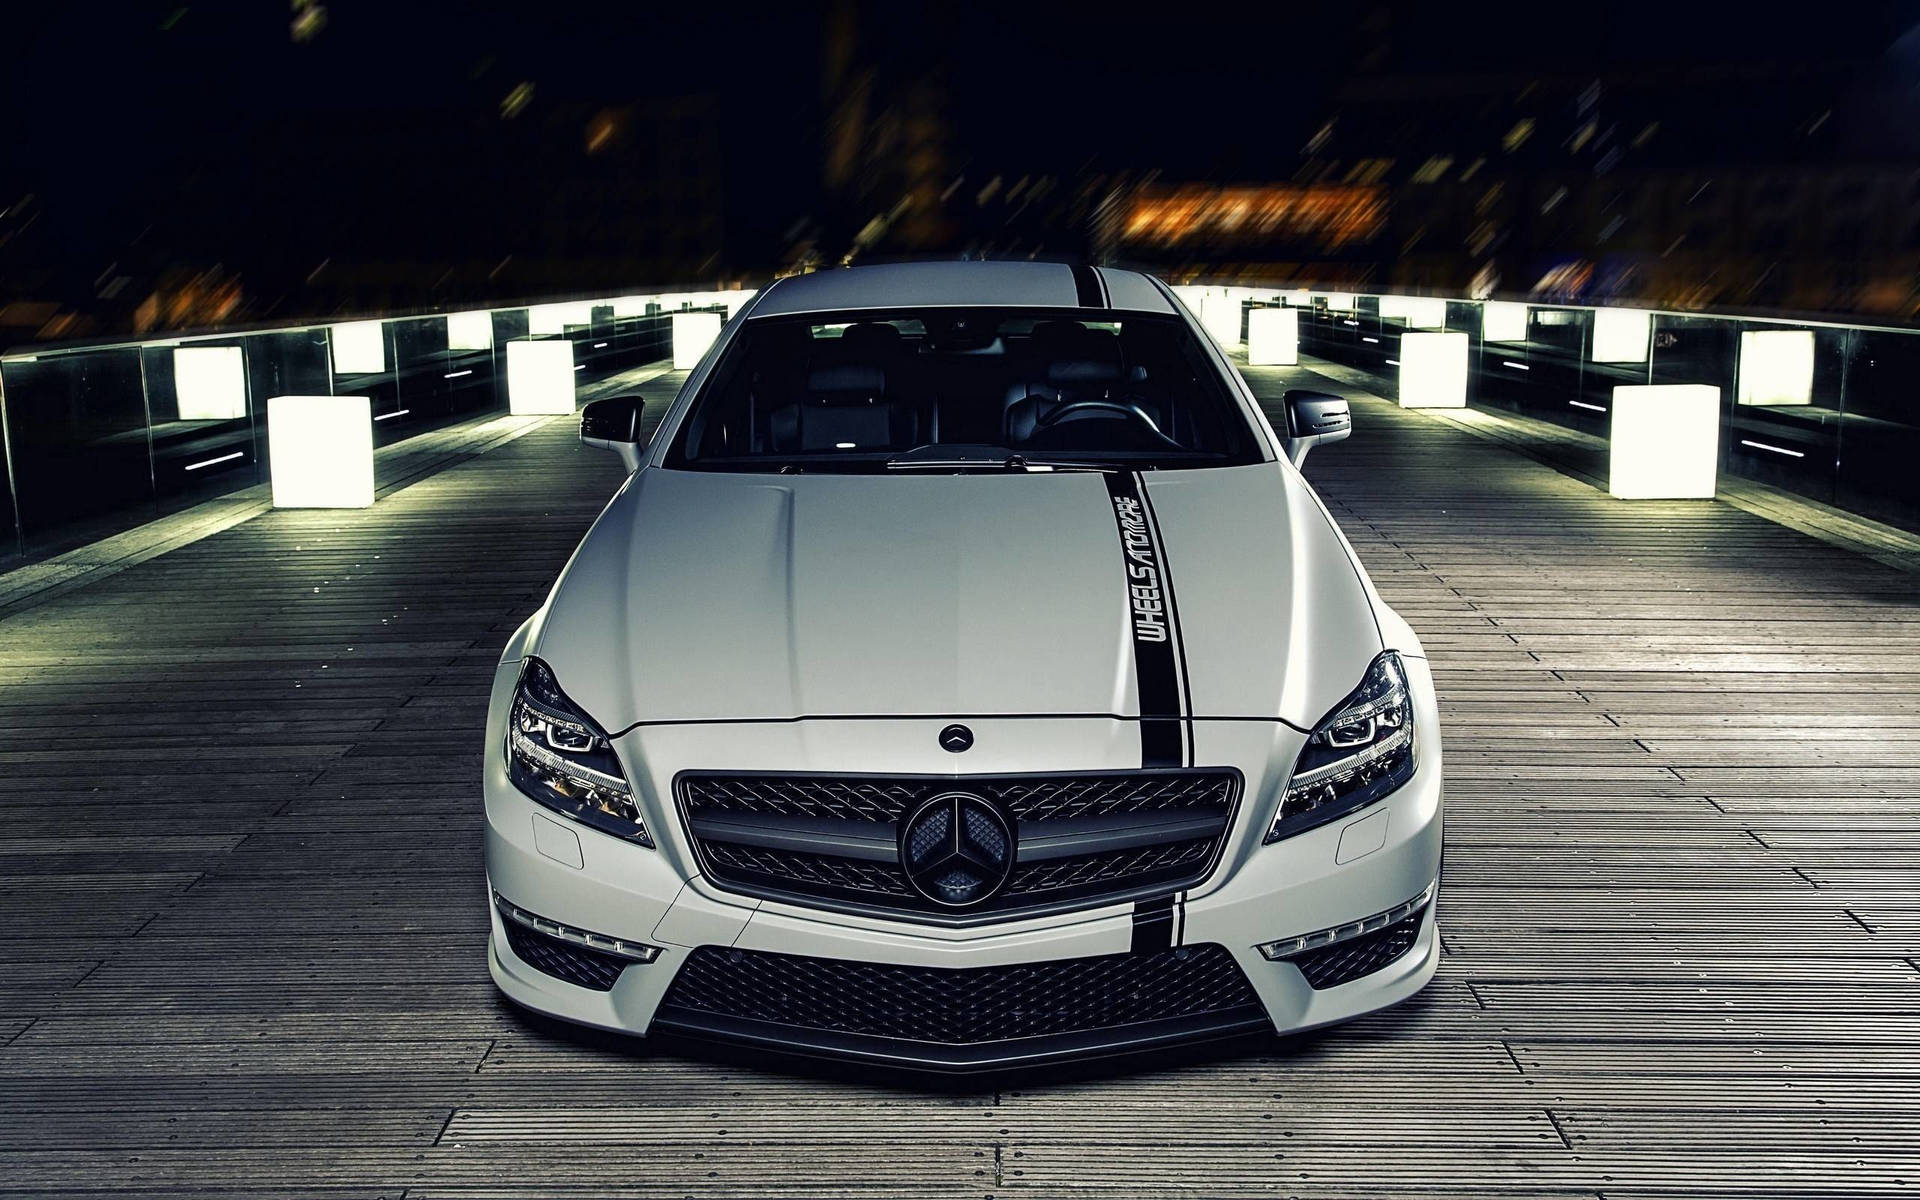 Embrace the Luxury of High Performance Car in Mercedes-Benz AMG Wallpaper